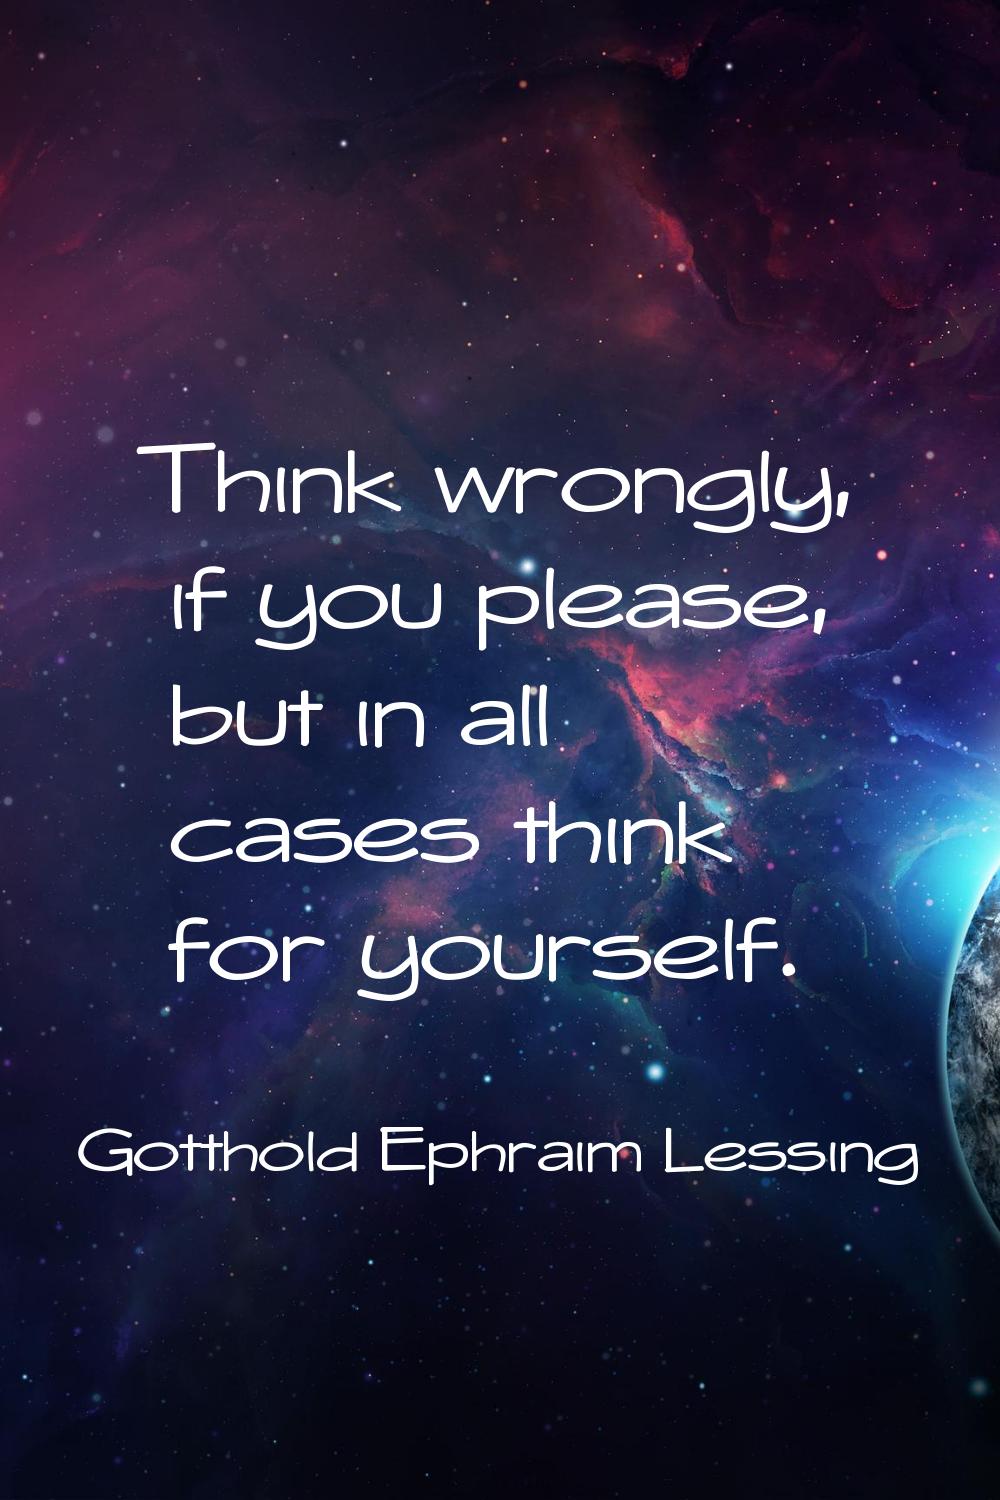 Think wrongly, if you please, but in all cases think for yourself.